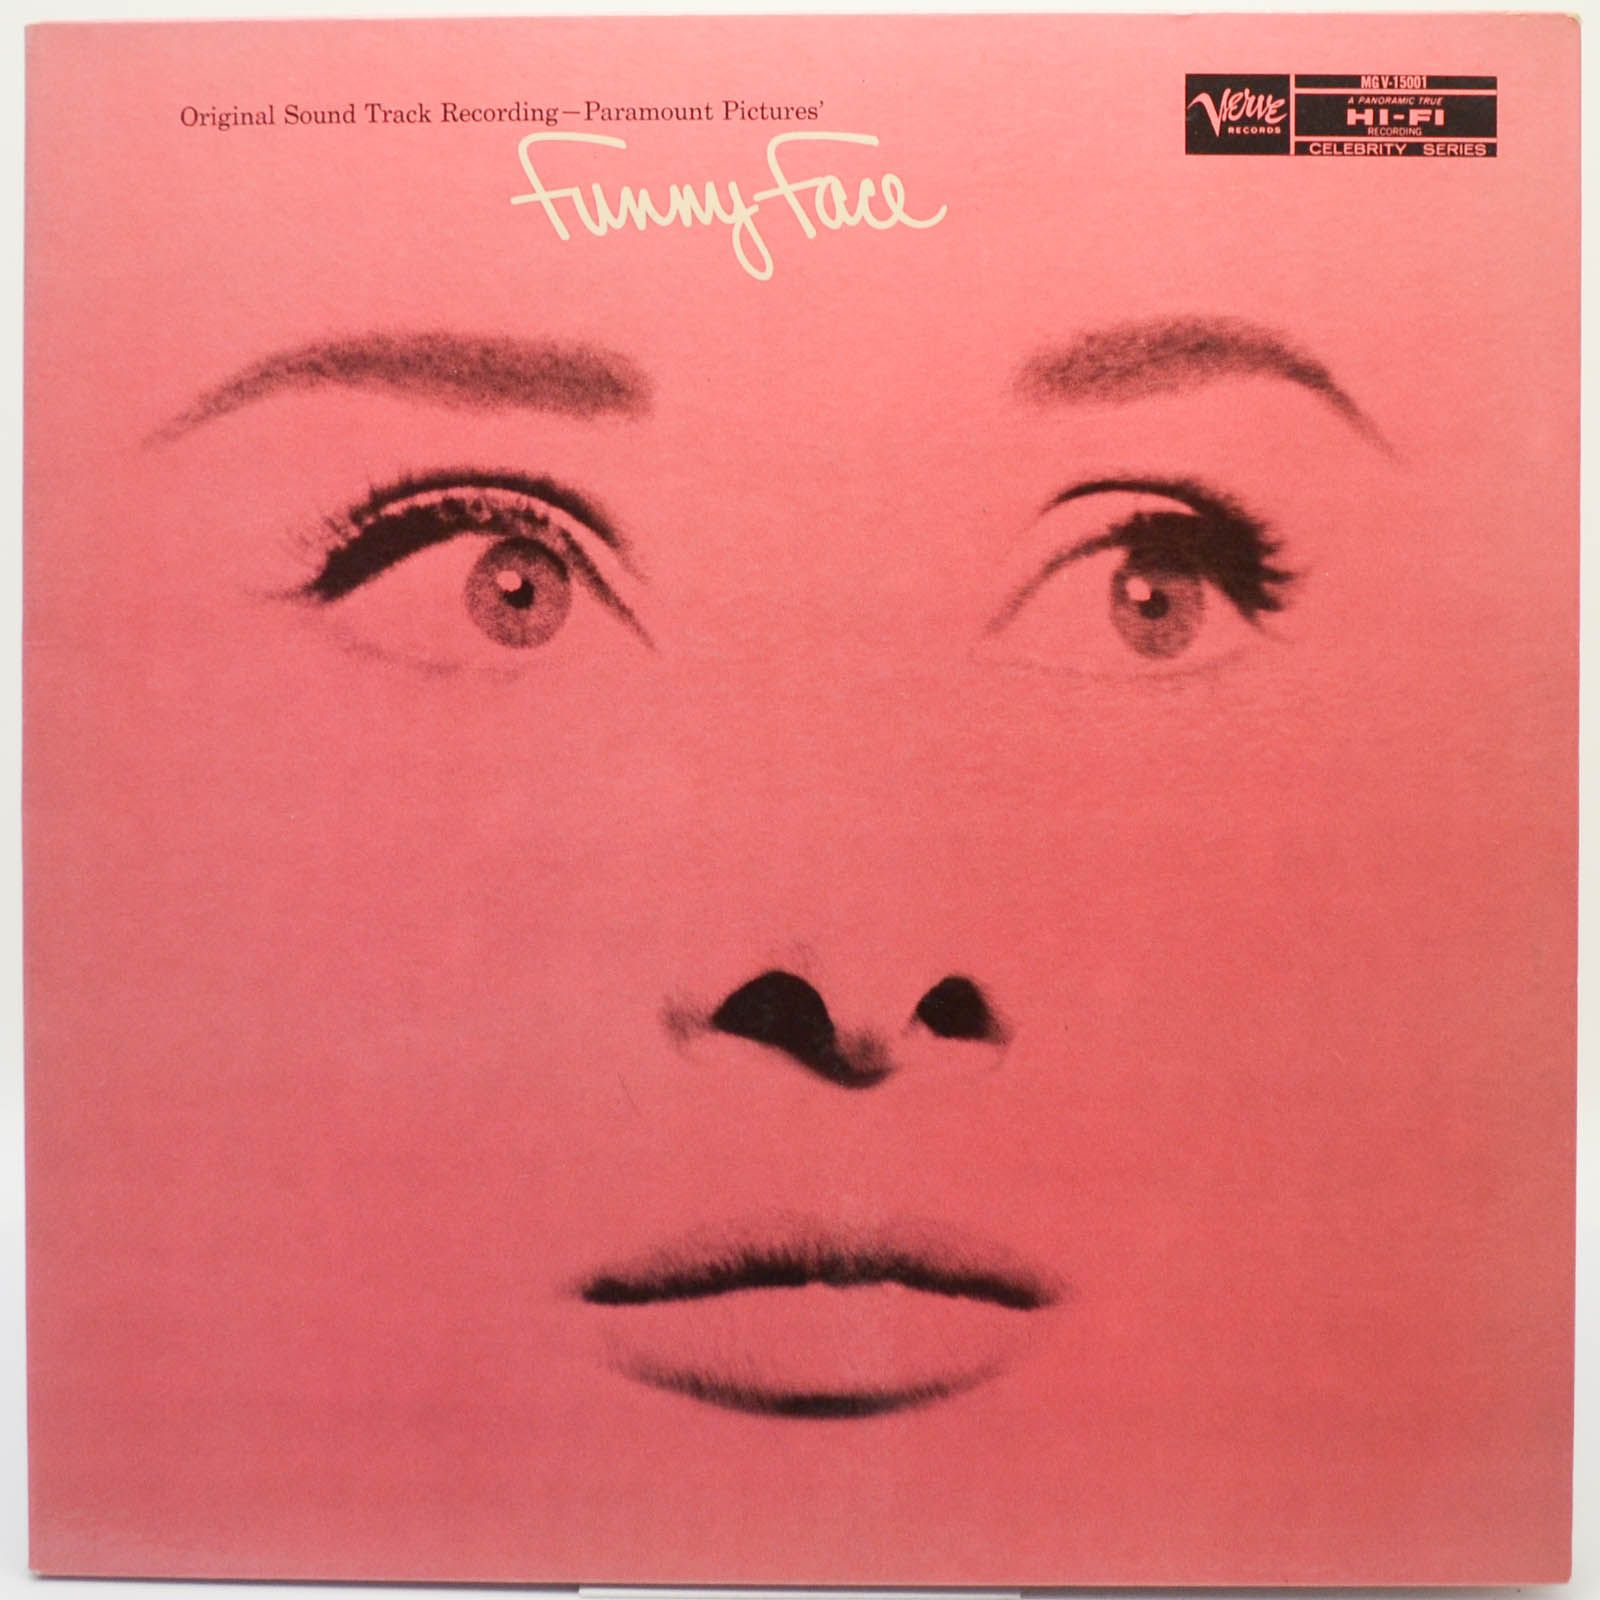 Fred Astaire, Audrey Hepburn And Kay Thompson — Funny Face (Original Sound Track Recording) (1-st, USA), 1957